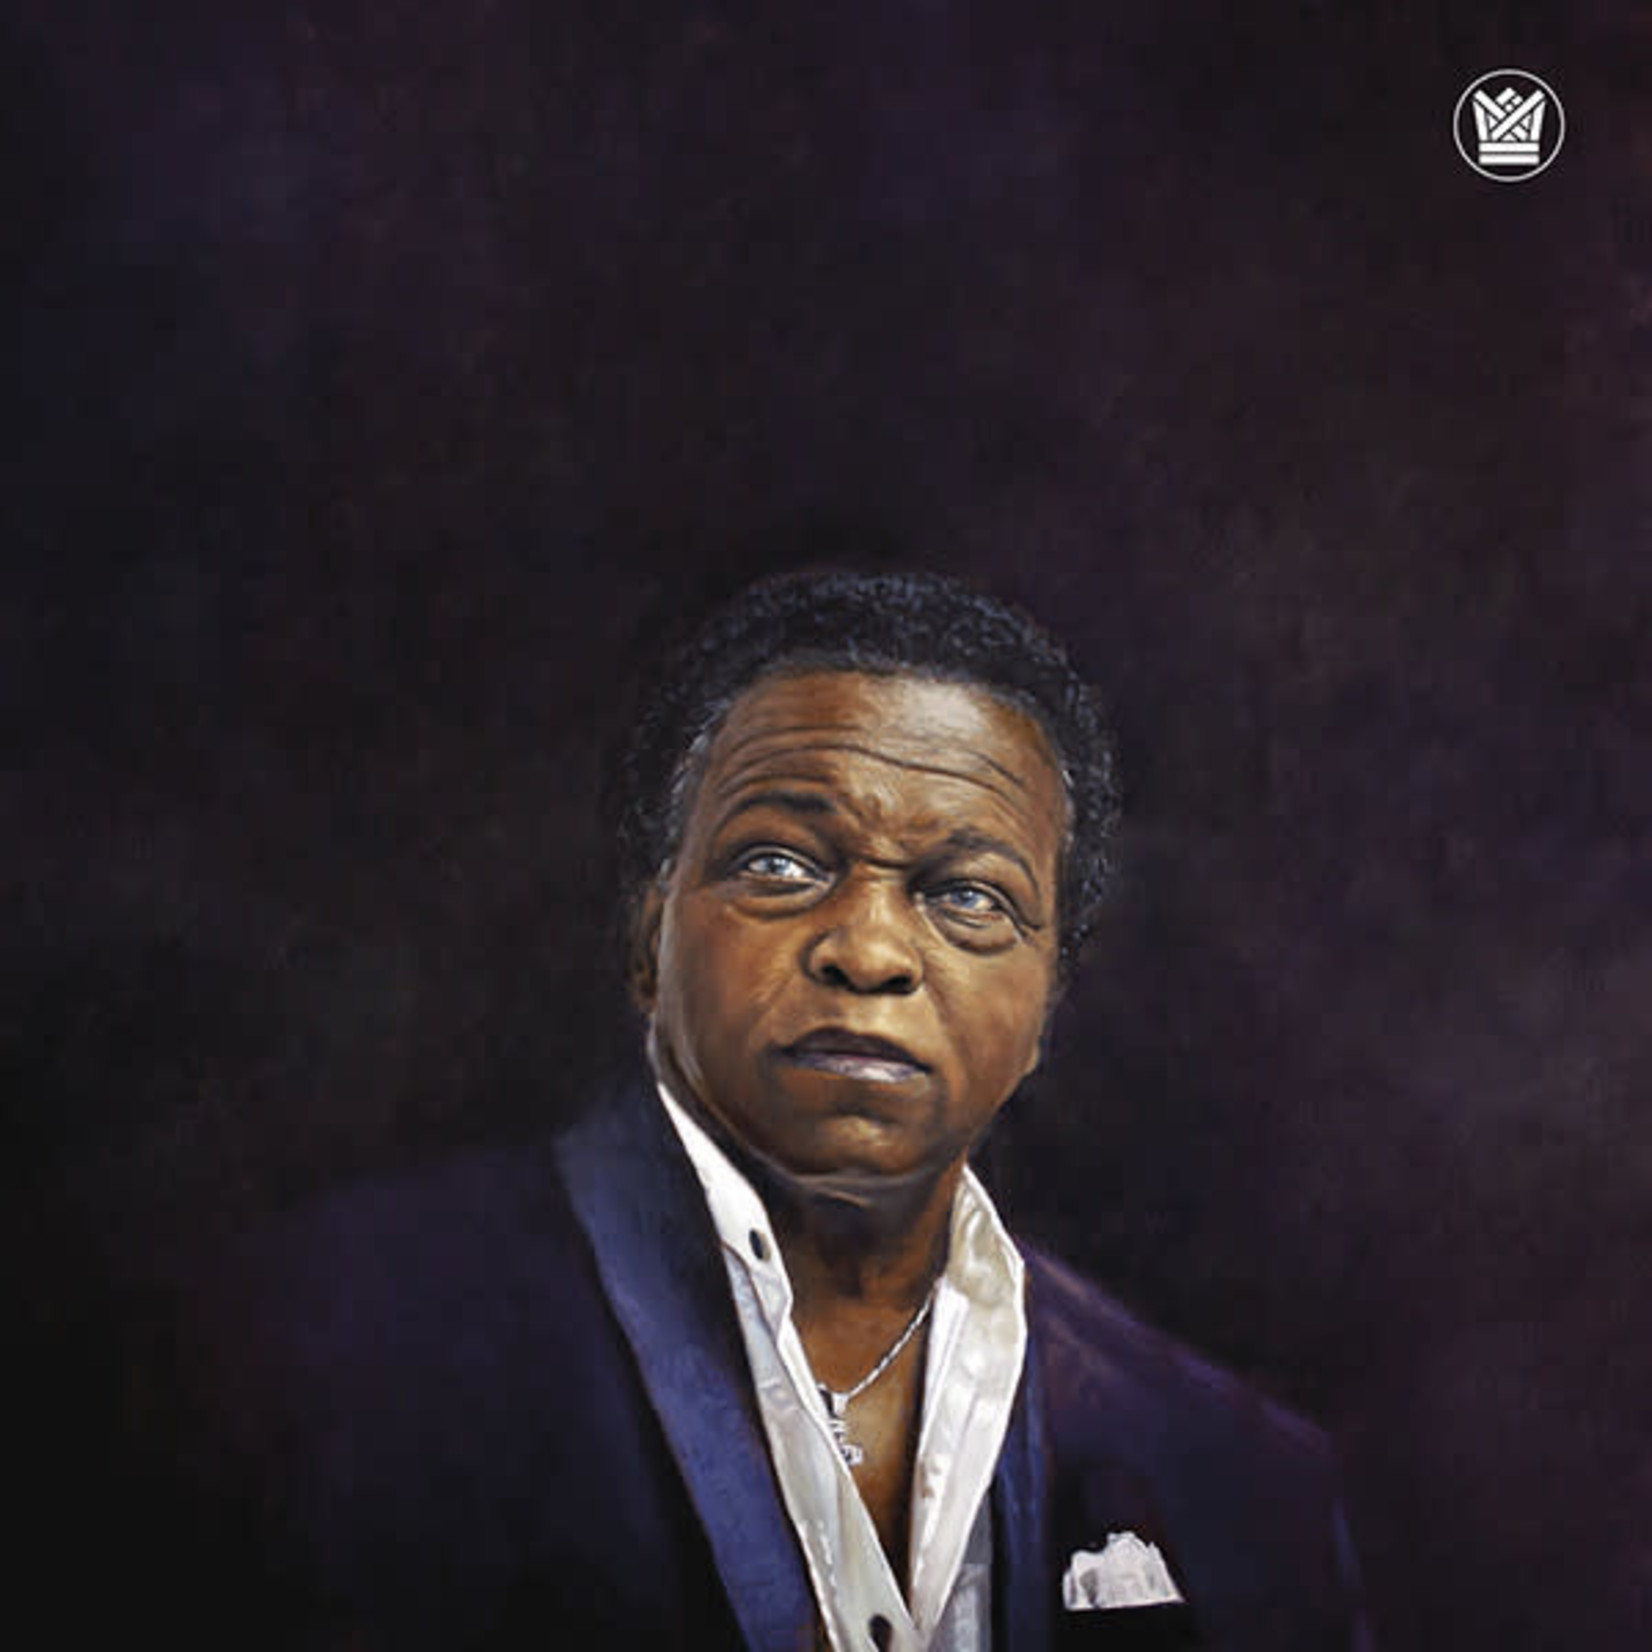 [New] Lee Fields & the Expressions - Big Crown Vaults Volume 1 (lavender swirl opaque vinyl)